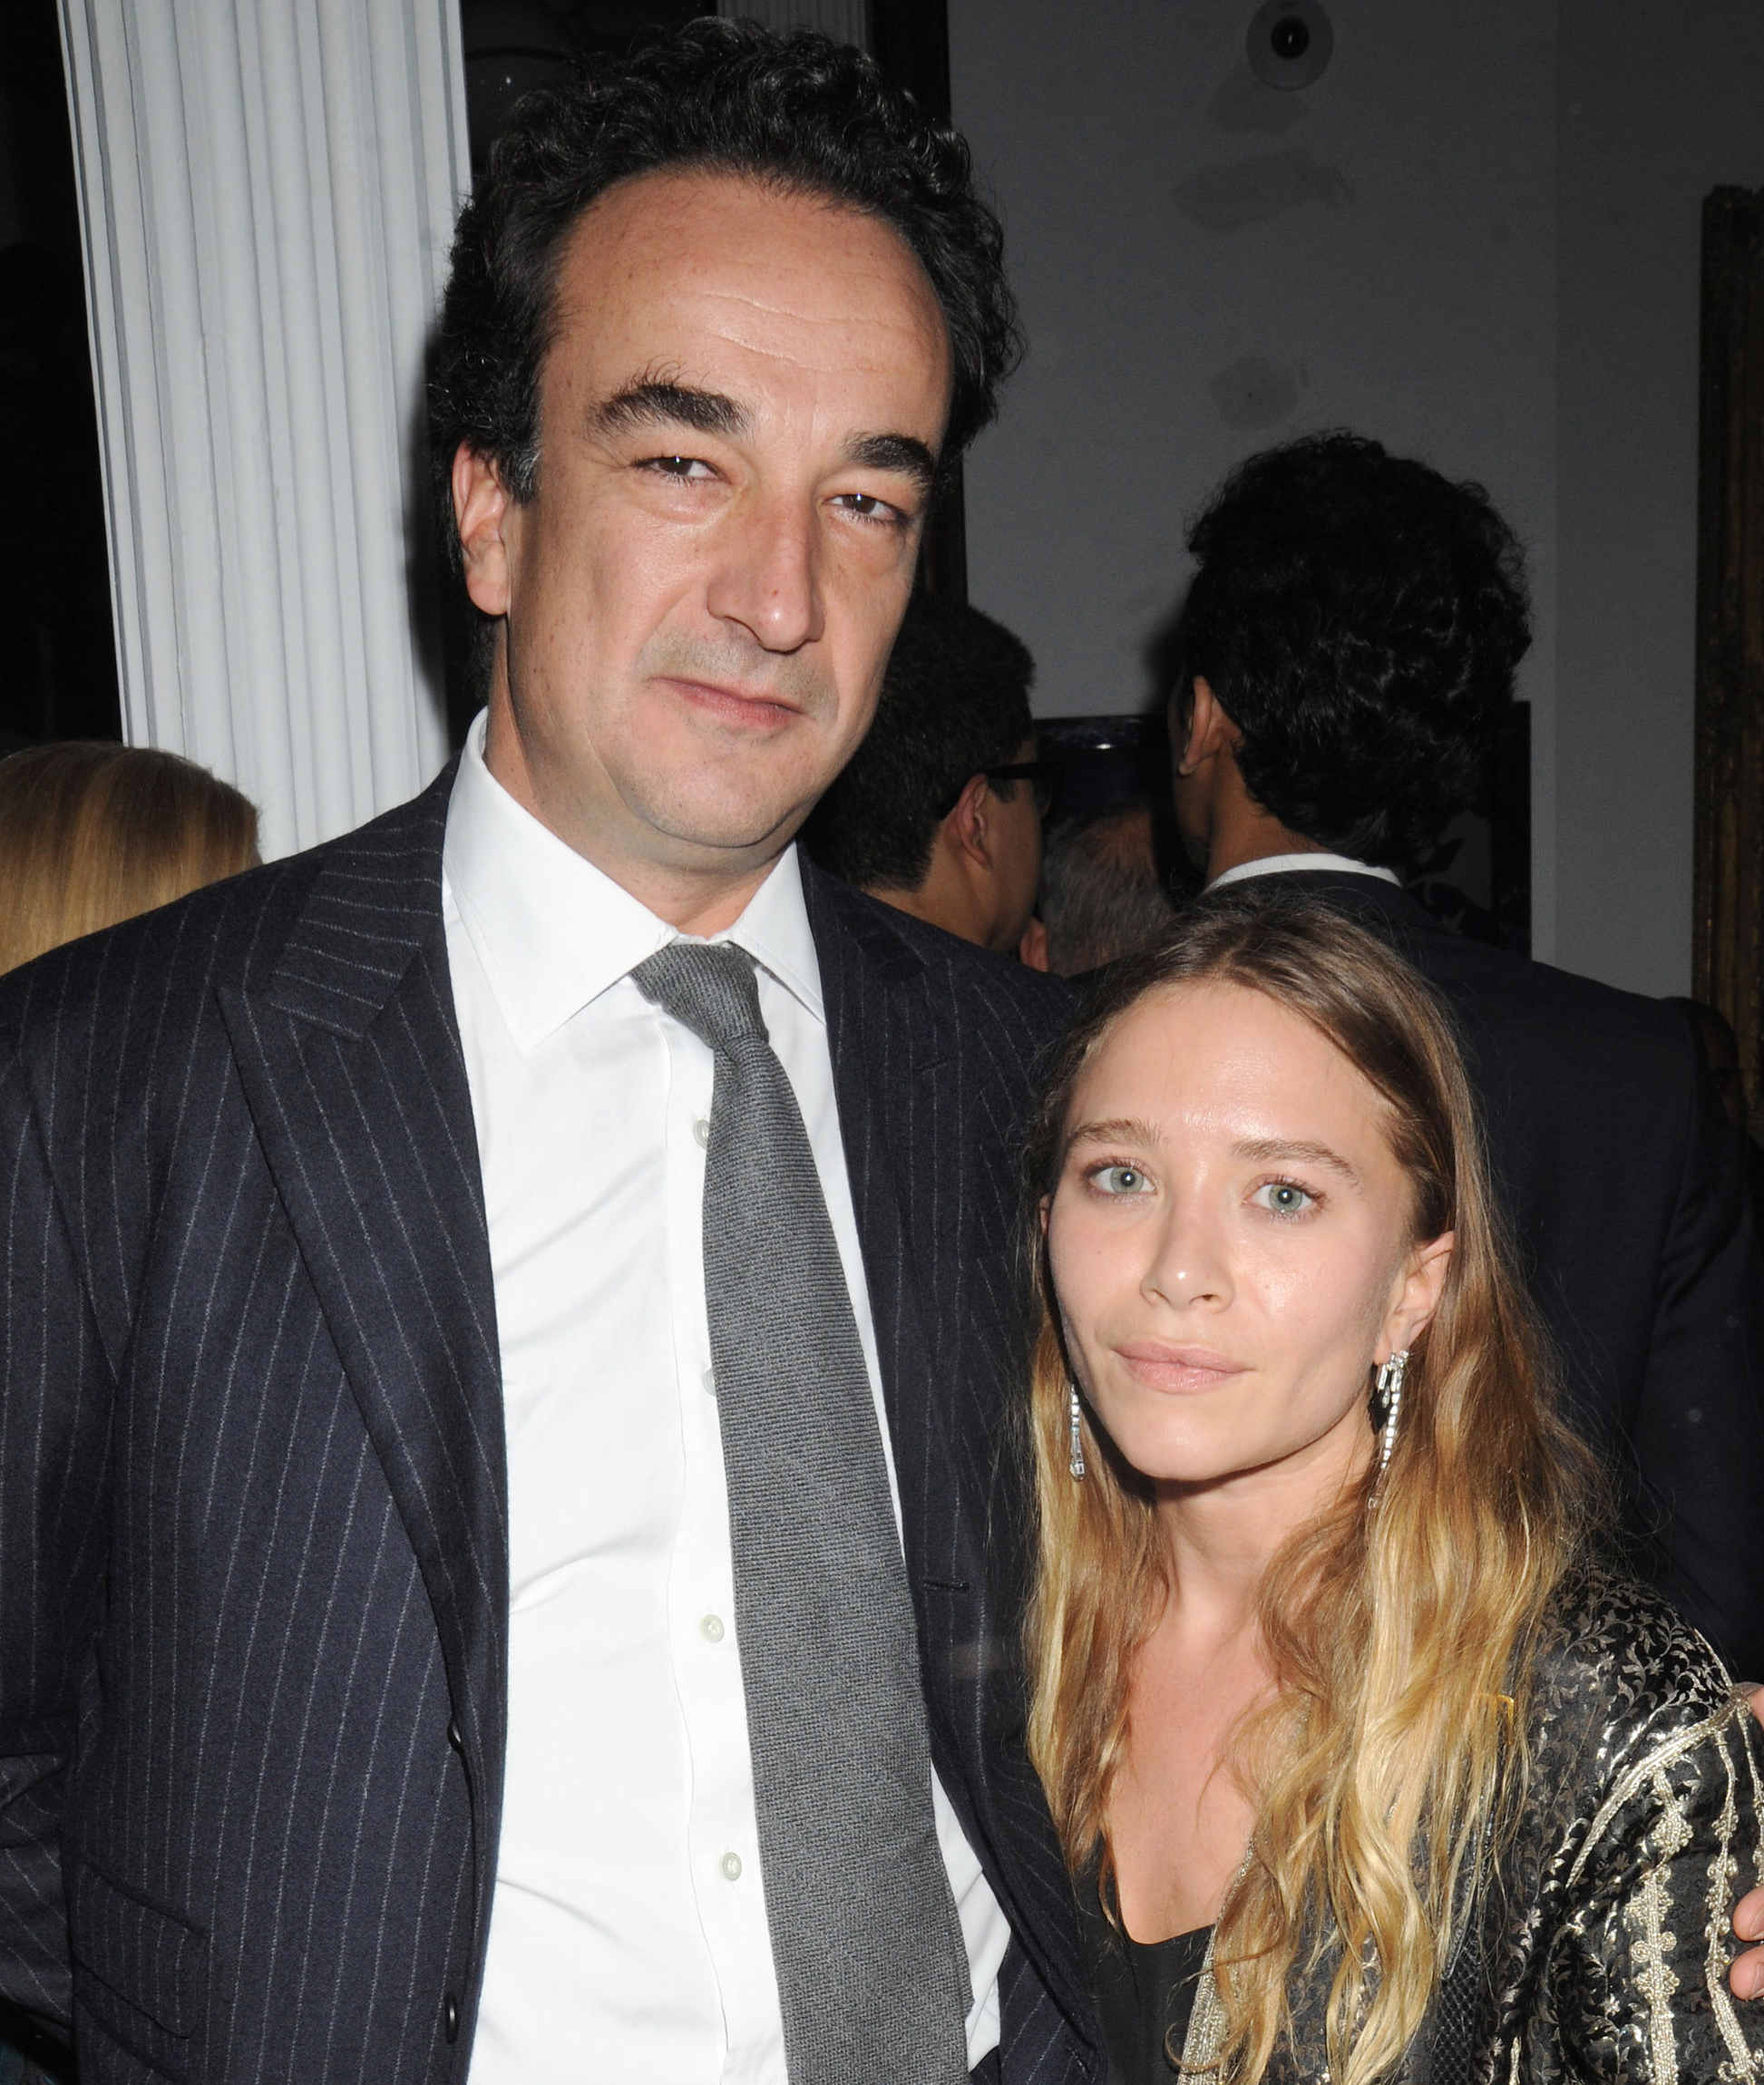 Mary-Kate Olsen and fiance Olivier Sarkozy at 2015 Tribeca Ball in NYC